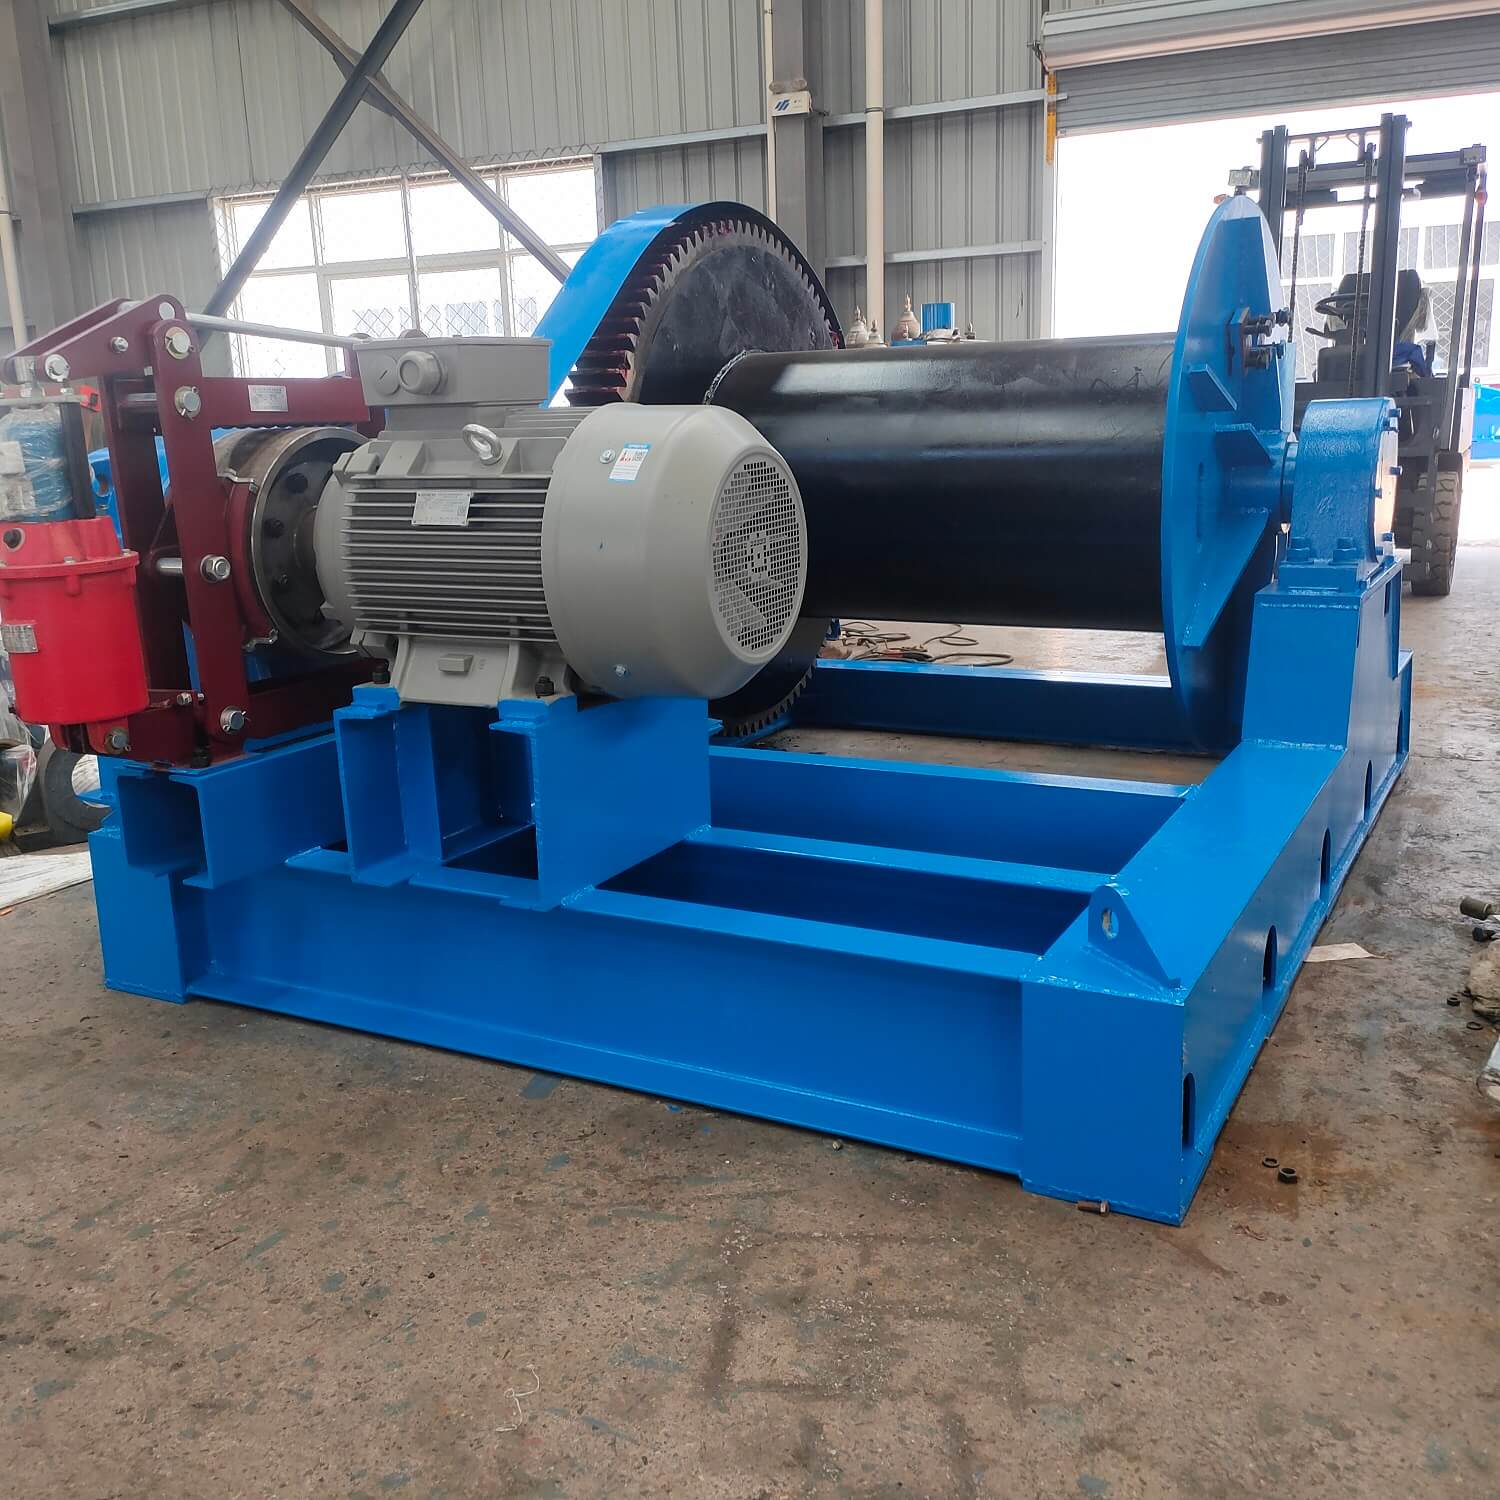 Site photos of 16 ton Building Electric Winch (Pulling cable winch)-2.jpg